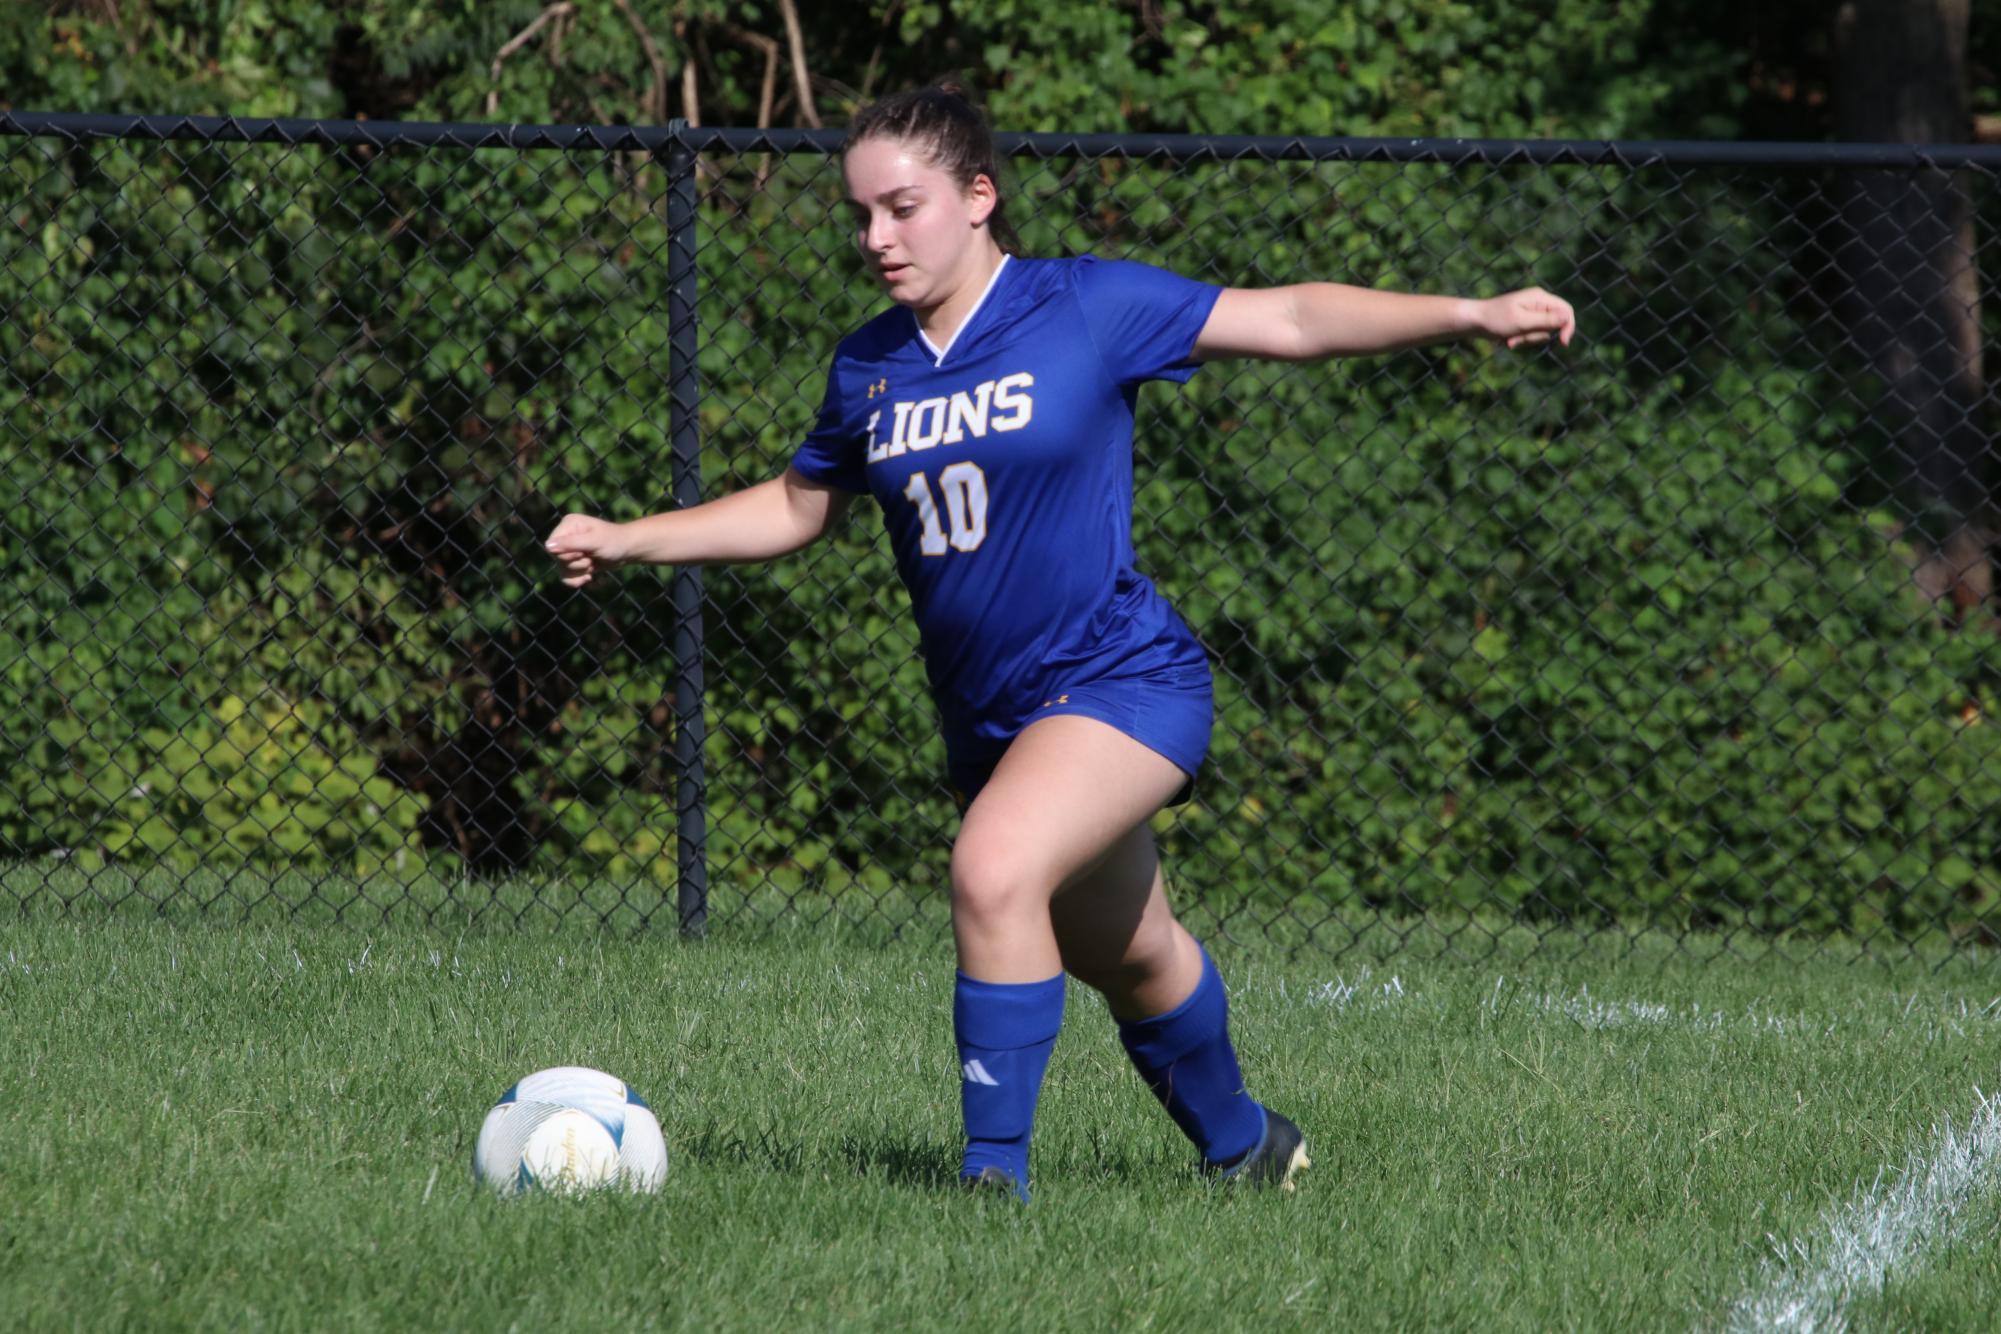 Senior Abby Greenberg has the ball for girls varsity soccer team. The team came back from a 2-1 deficit to tie the game.